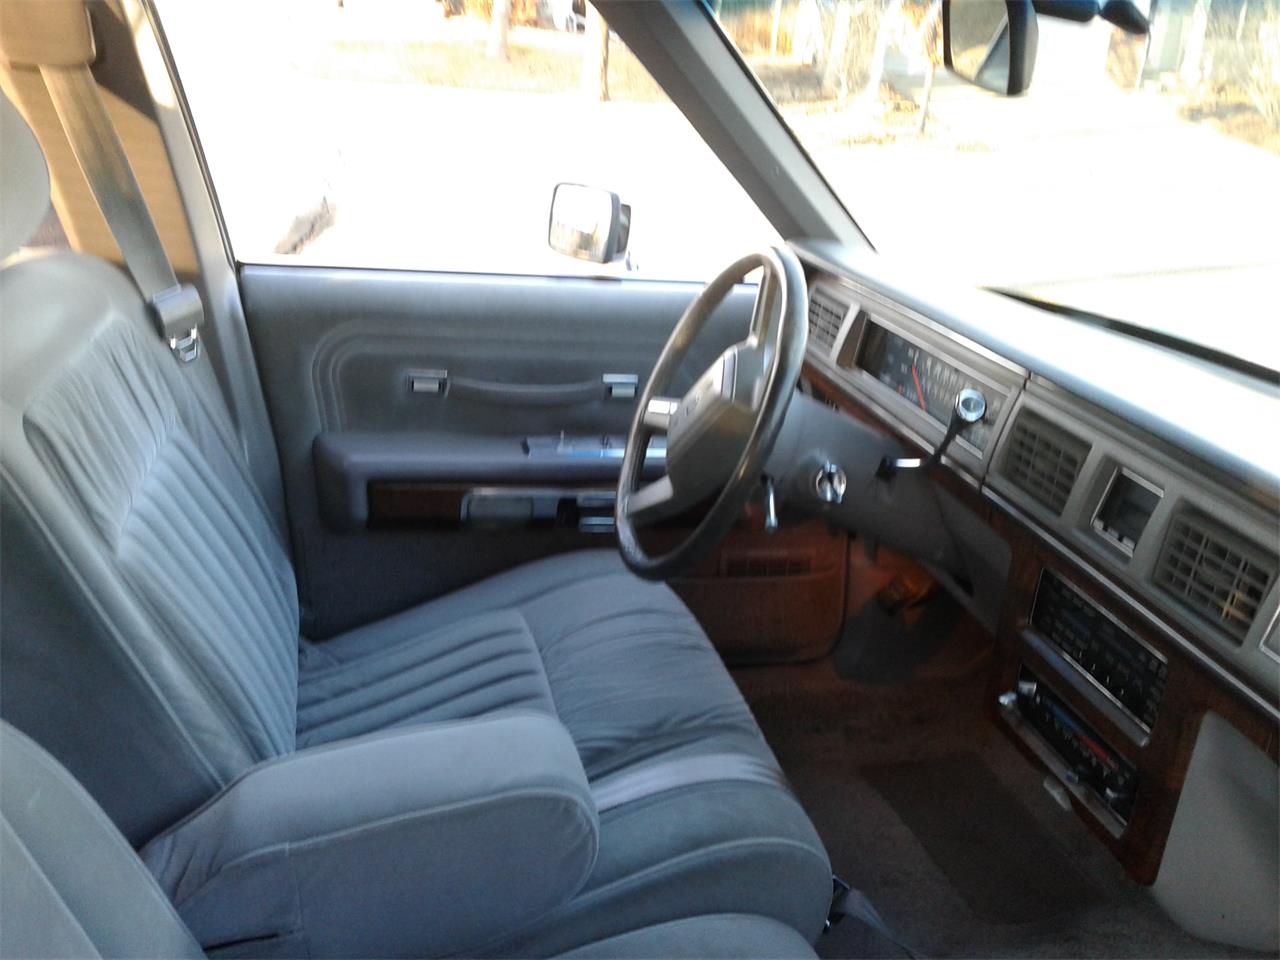 1989 Ford Crown Victoria For Sale Classiccars Com Cc 1070923